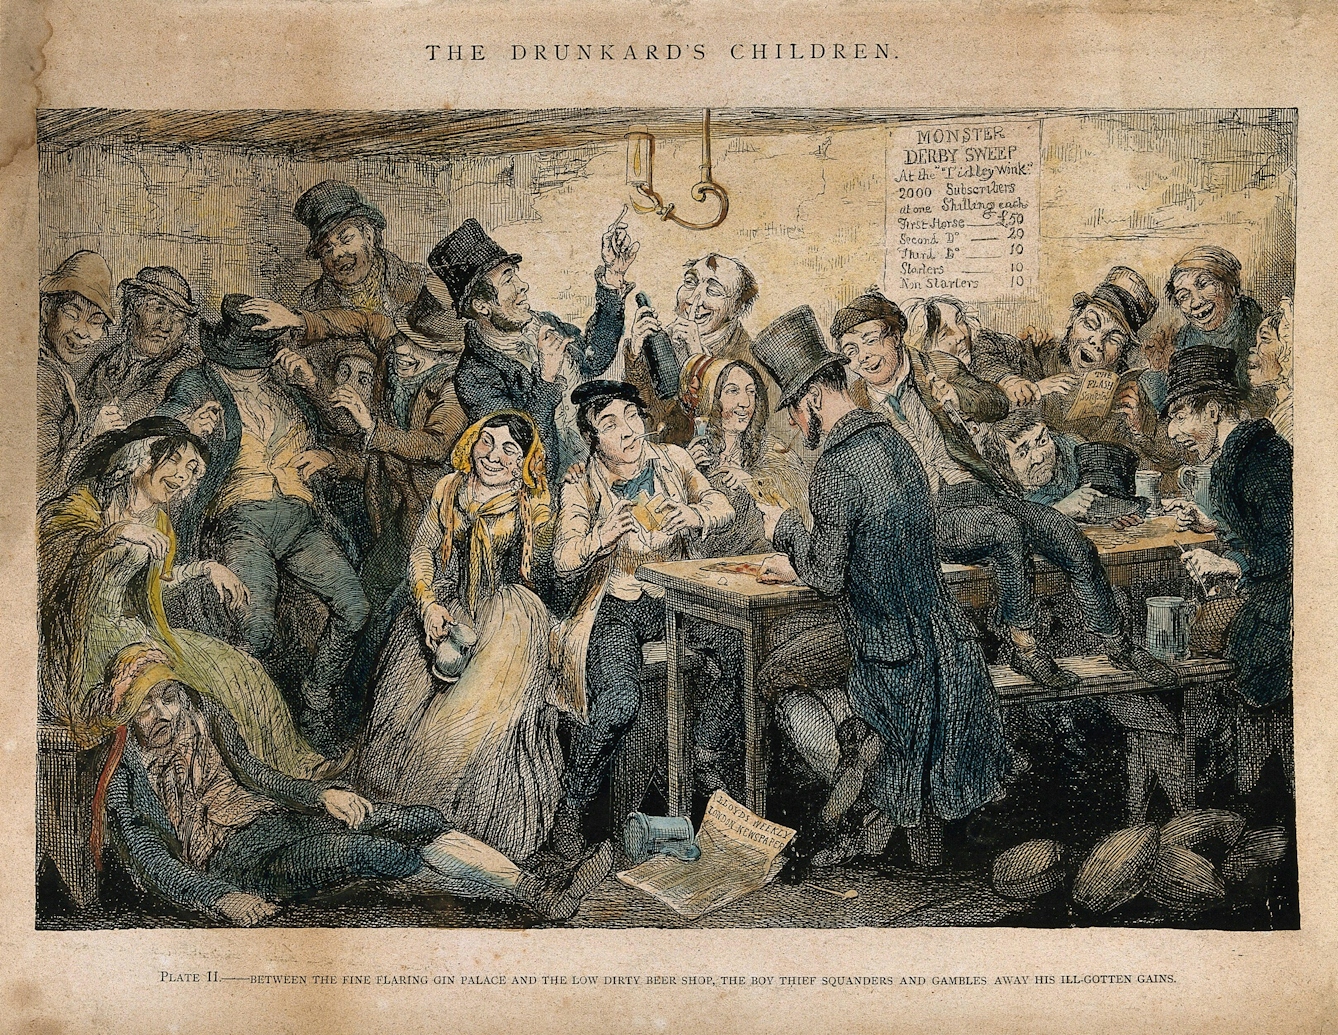 A colour illustration showing a busy interior scene of a drinking den. A group of men and women are crowded around a long table with bench seating. Some are laughing, some are slumped. Some of the people at the table are playing cards. A poster on the wall says 'Monster Derby Sweep'.